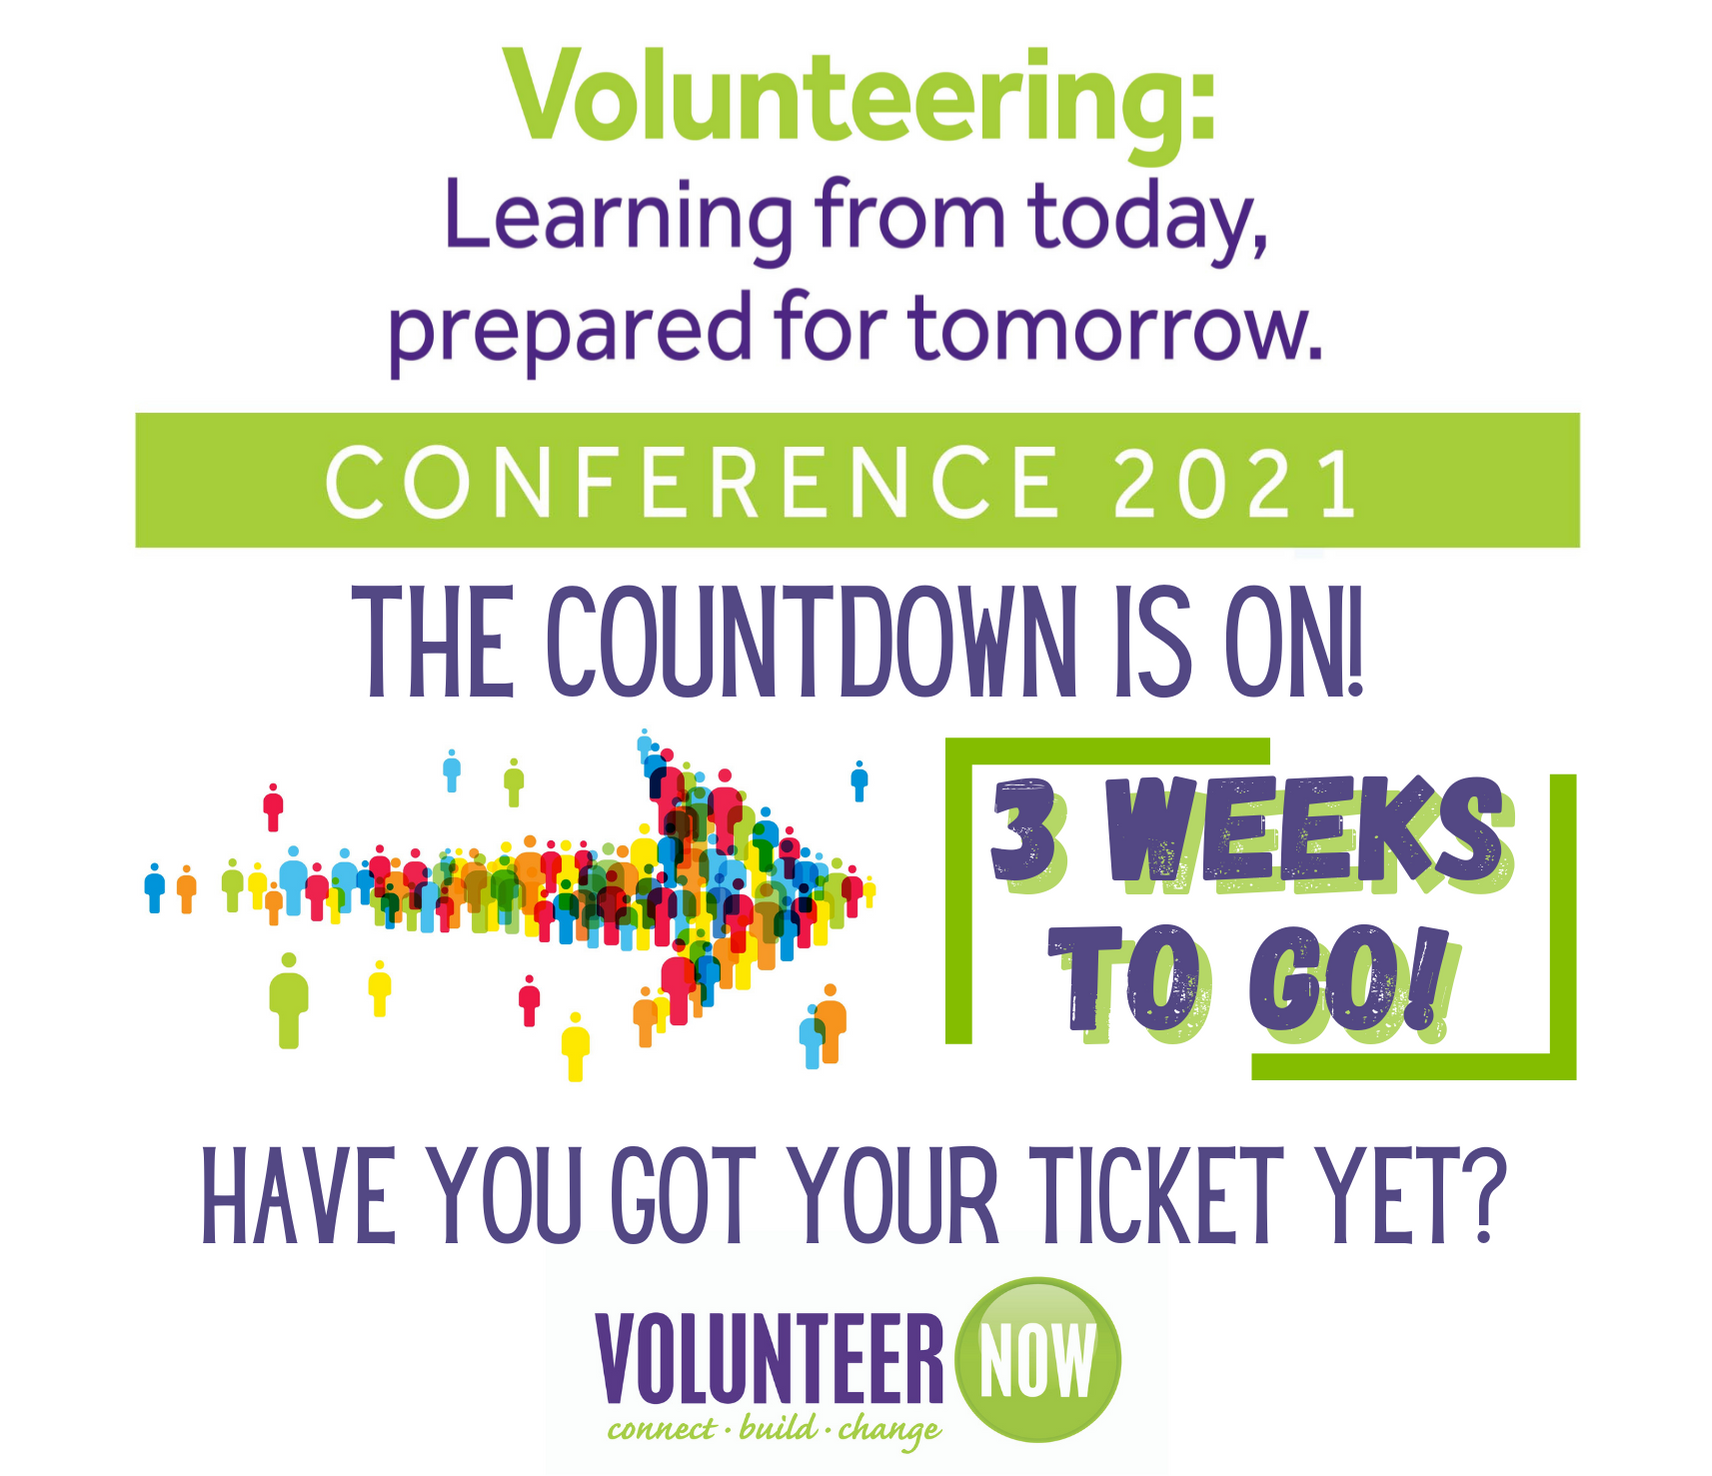 Volunteering: Learning from today, prepared for tomorrow